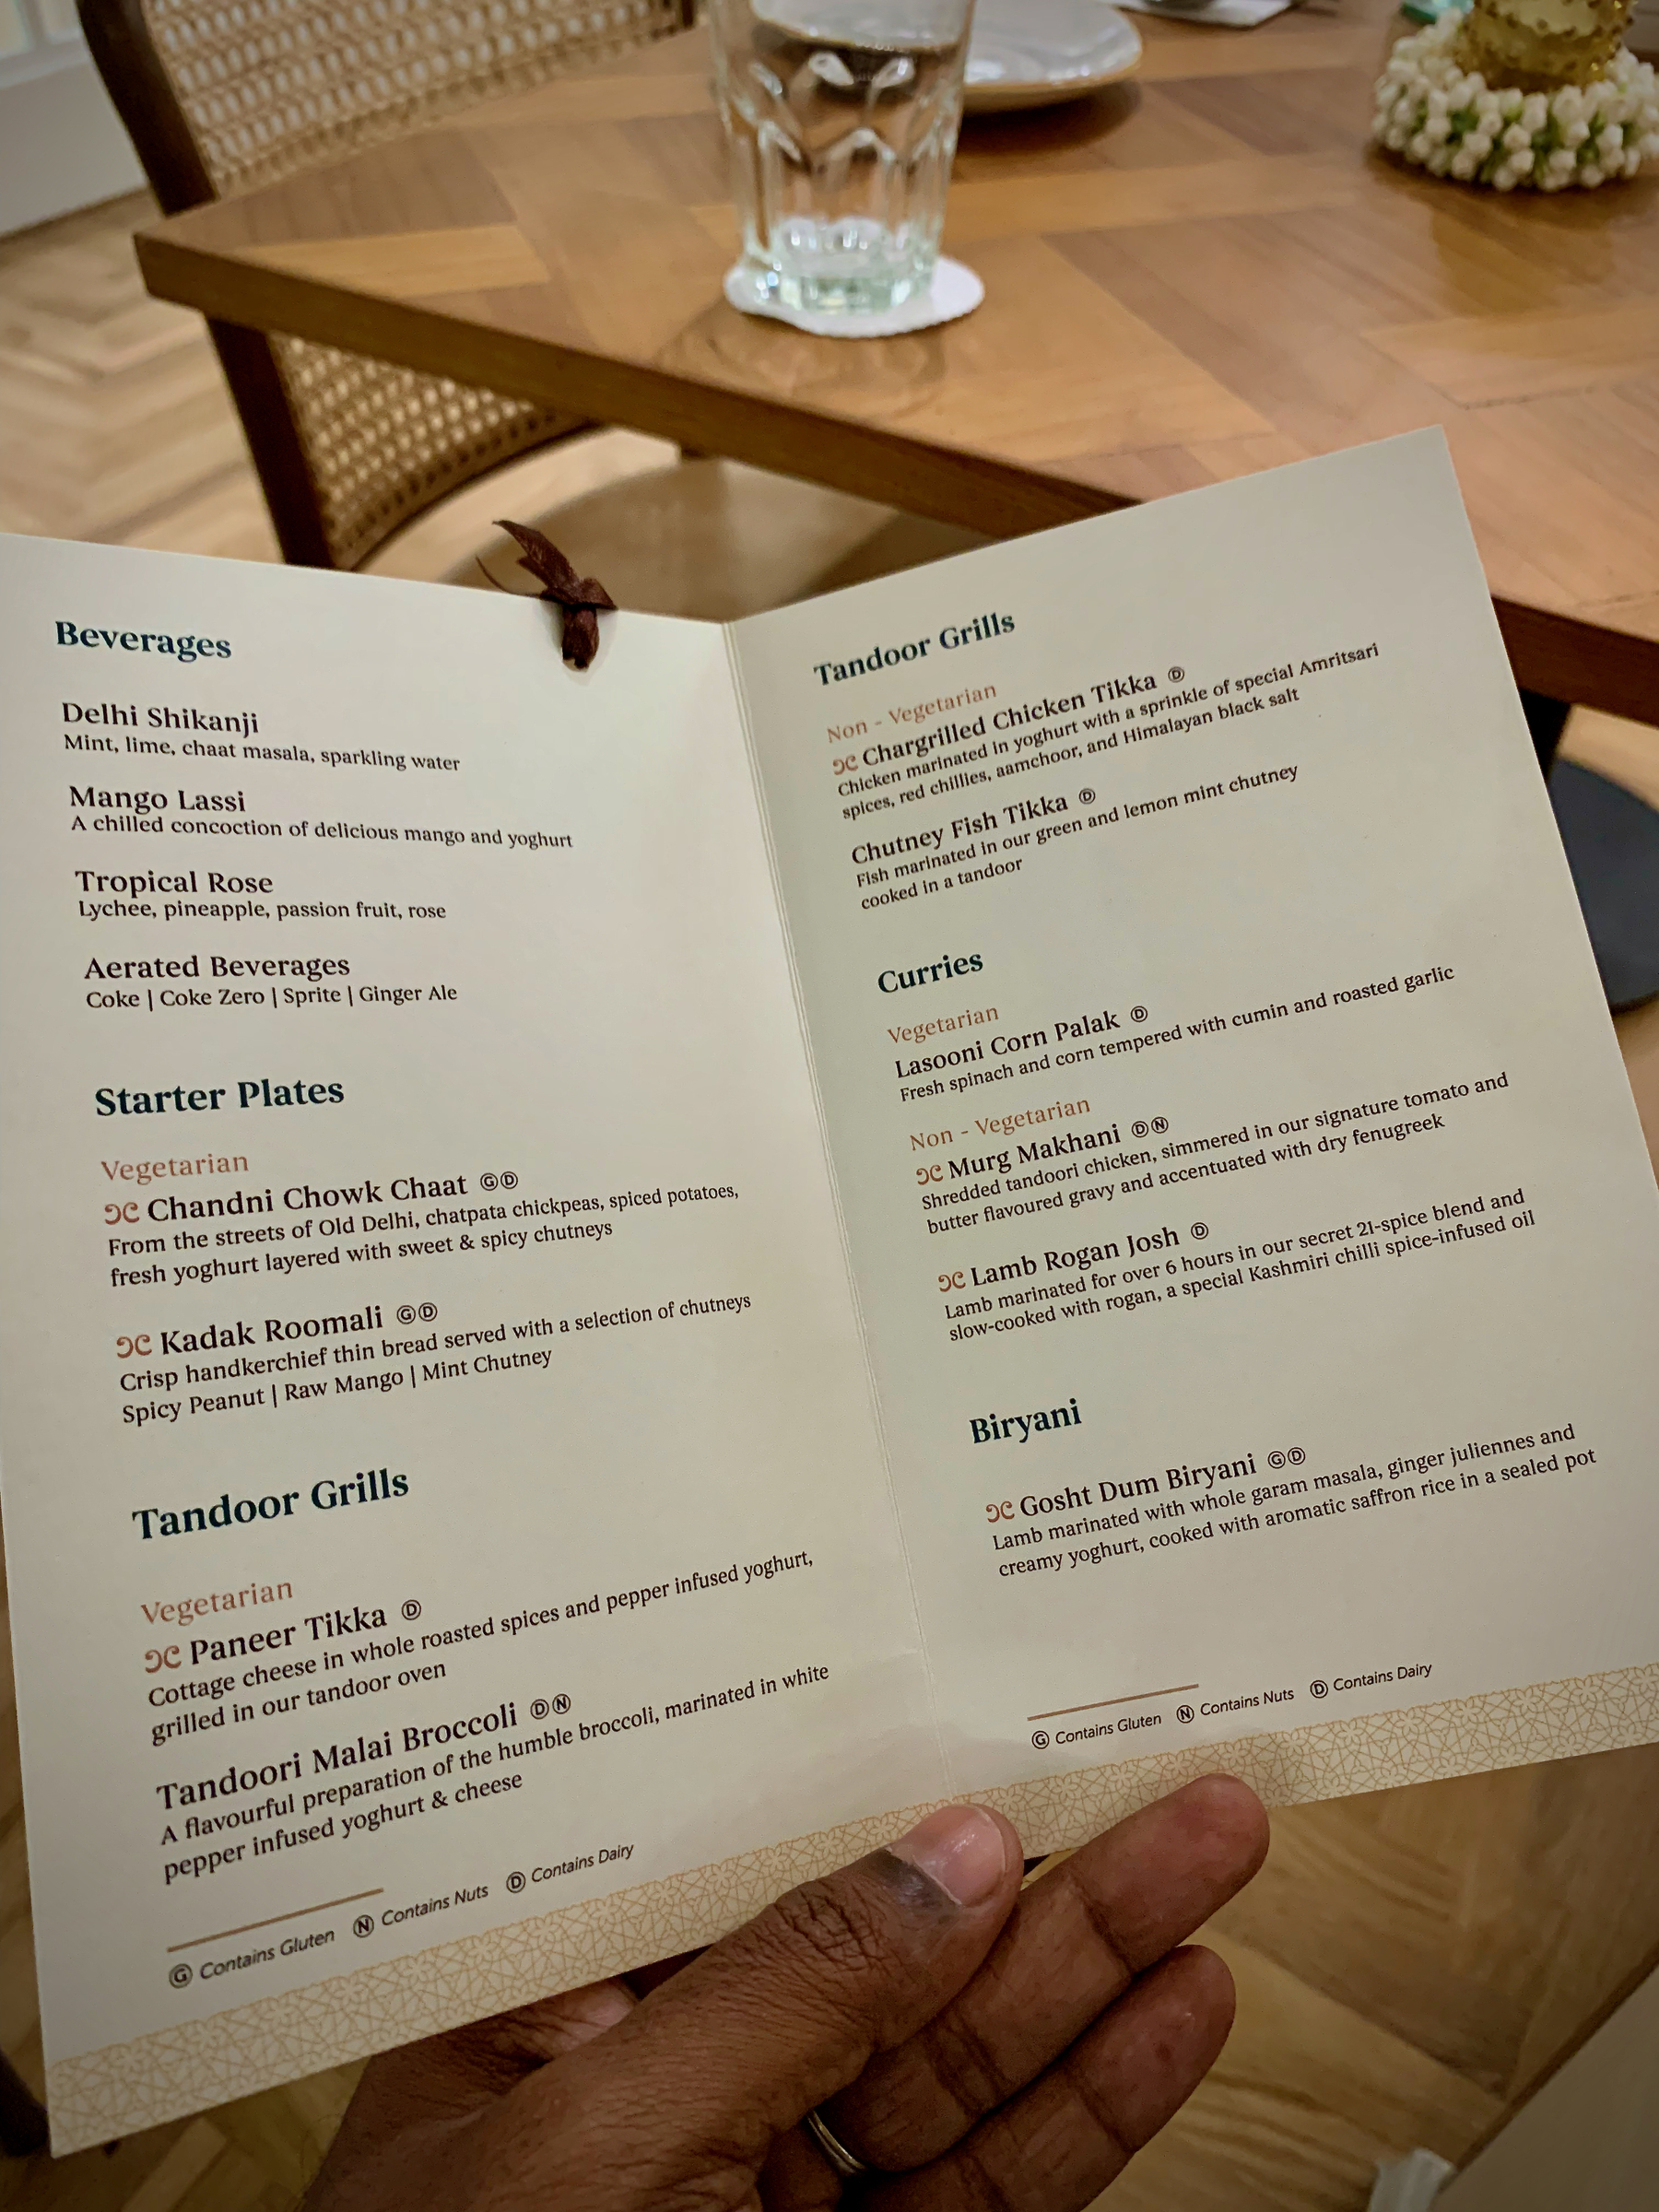 The menu of the 5 course meal that was served at the opening of Copper Grillhouse restaurant in Kuala Lumpur